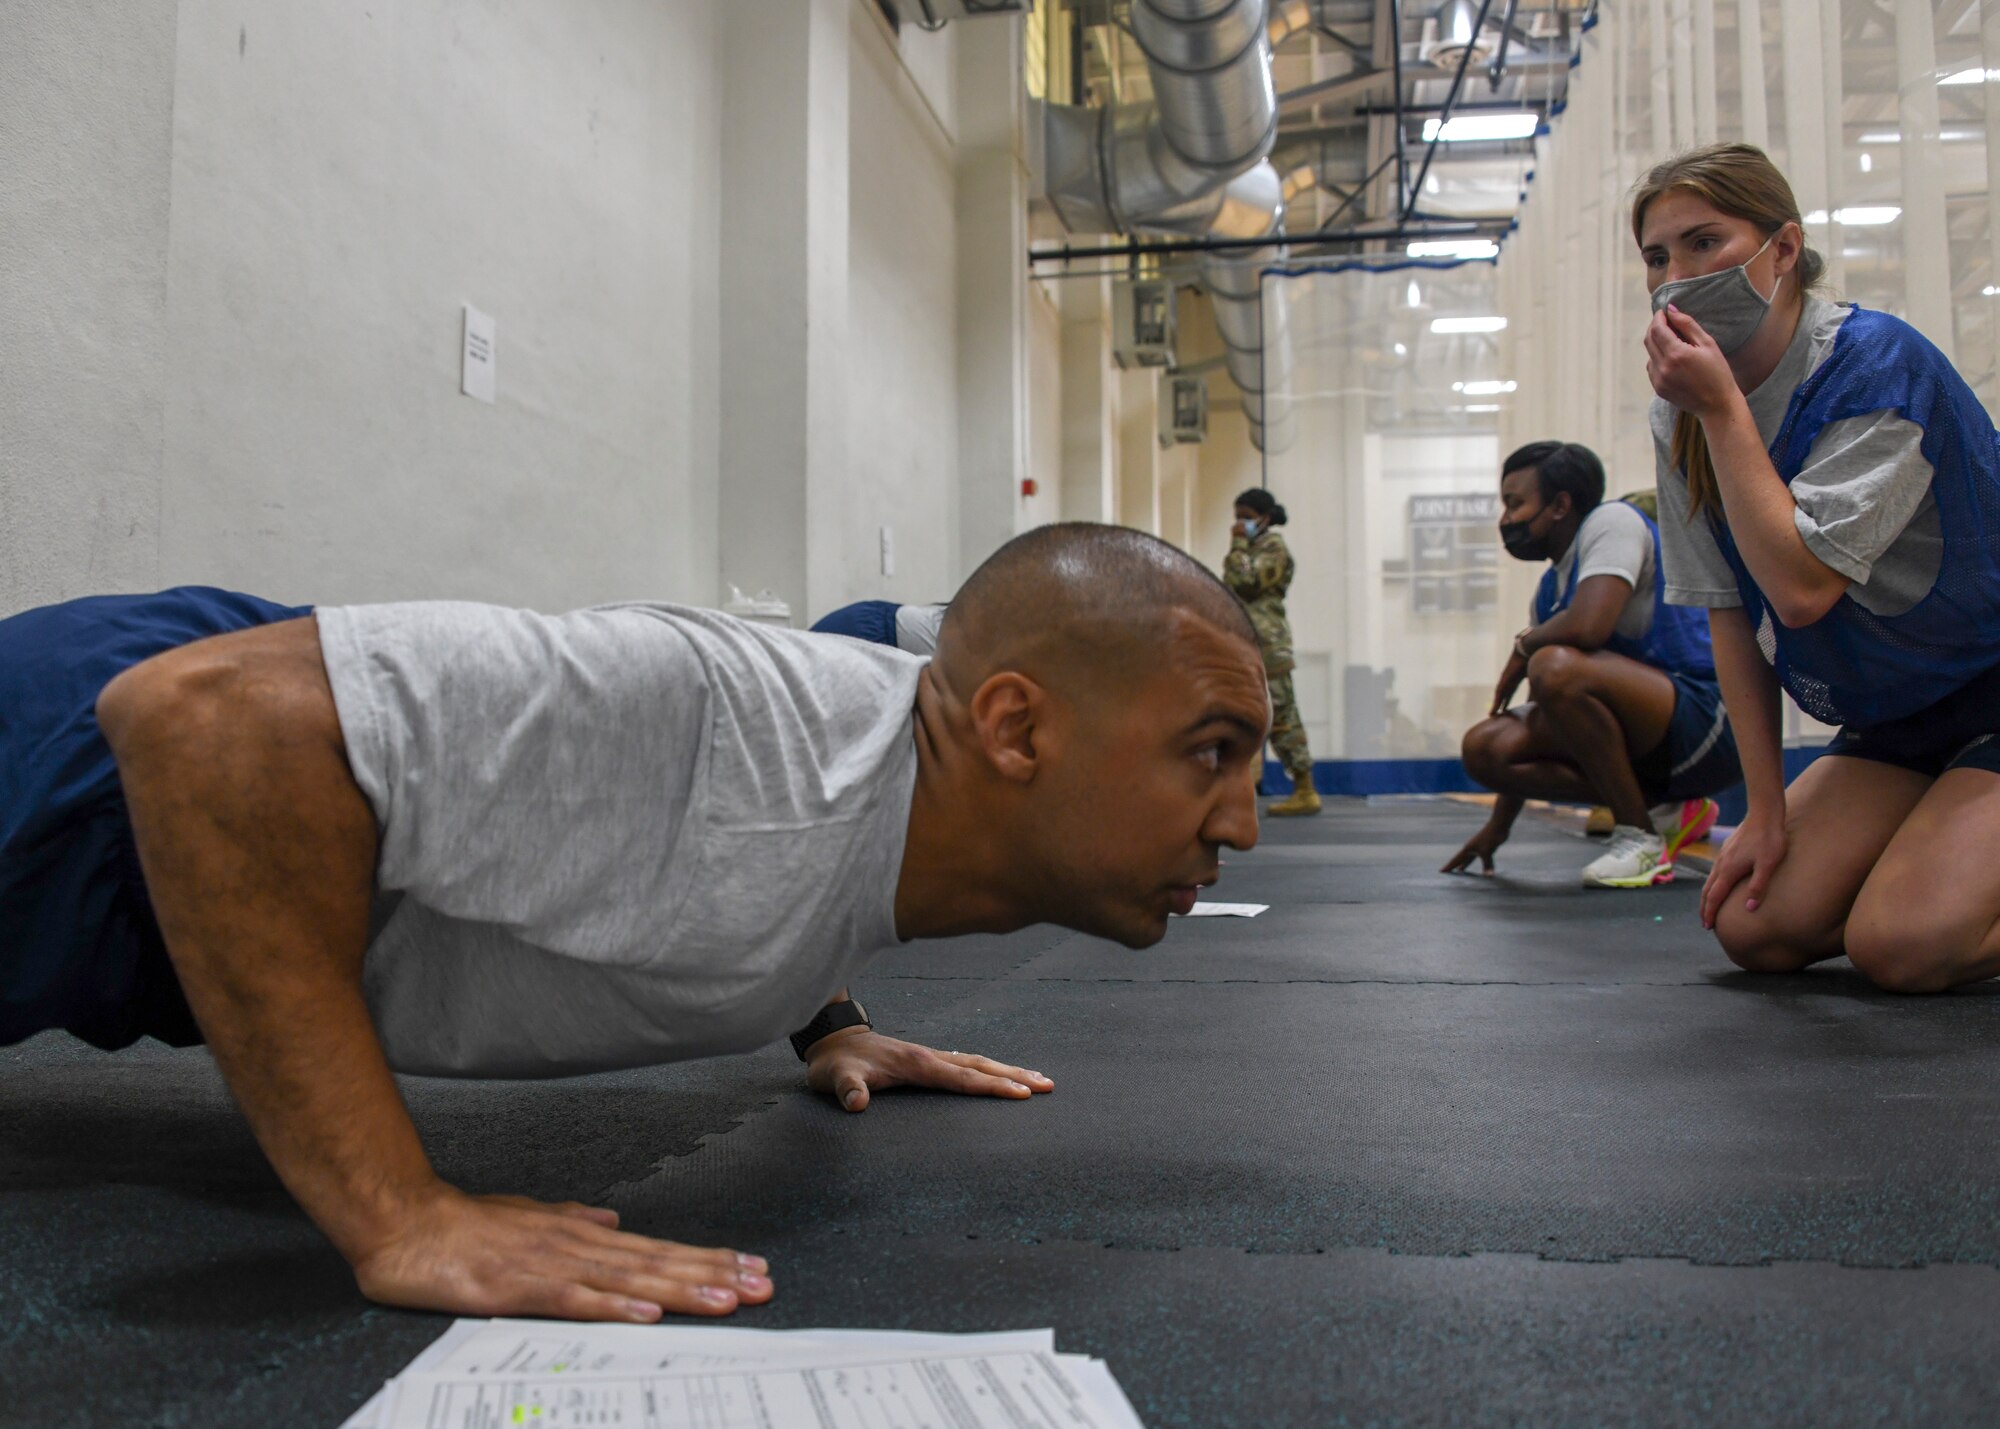 459th Air Refueling Wing Airmen count the push-ups of their partners August 14, 2021, at Joint Base Andrews, Md. The push-up portion of the test now weighs more towards the overall score being 20 points as opposed to 10 points. (U.S. Air Force photo by Senior Airman Andreaa Phillips)